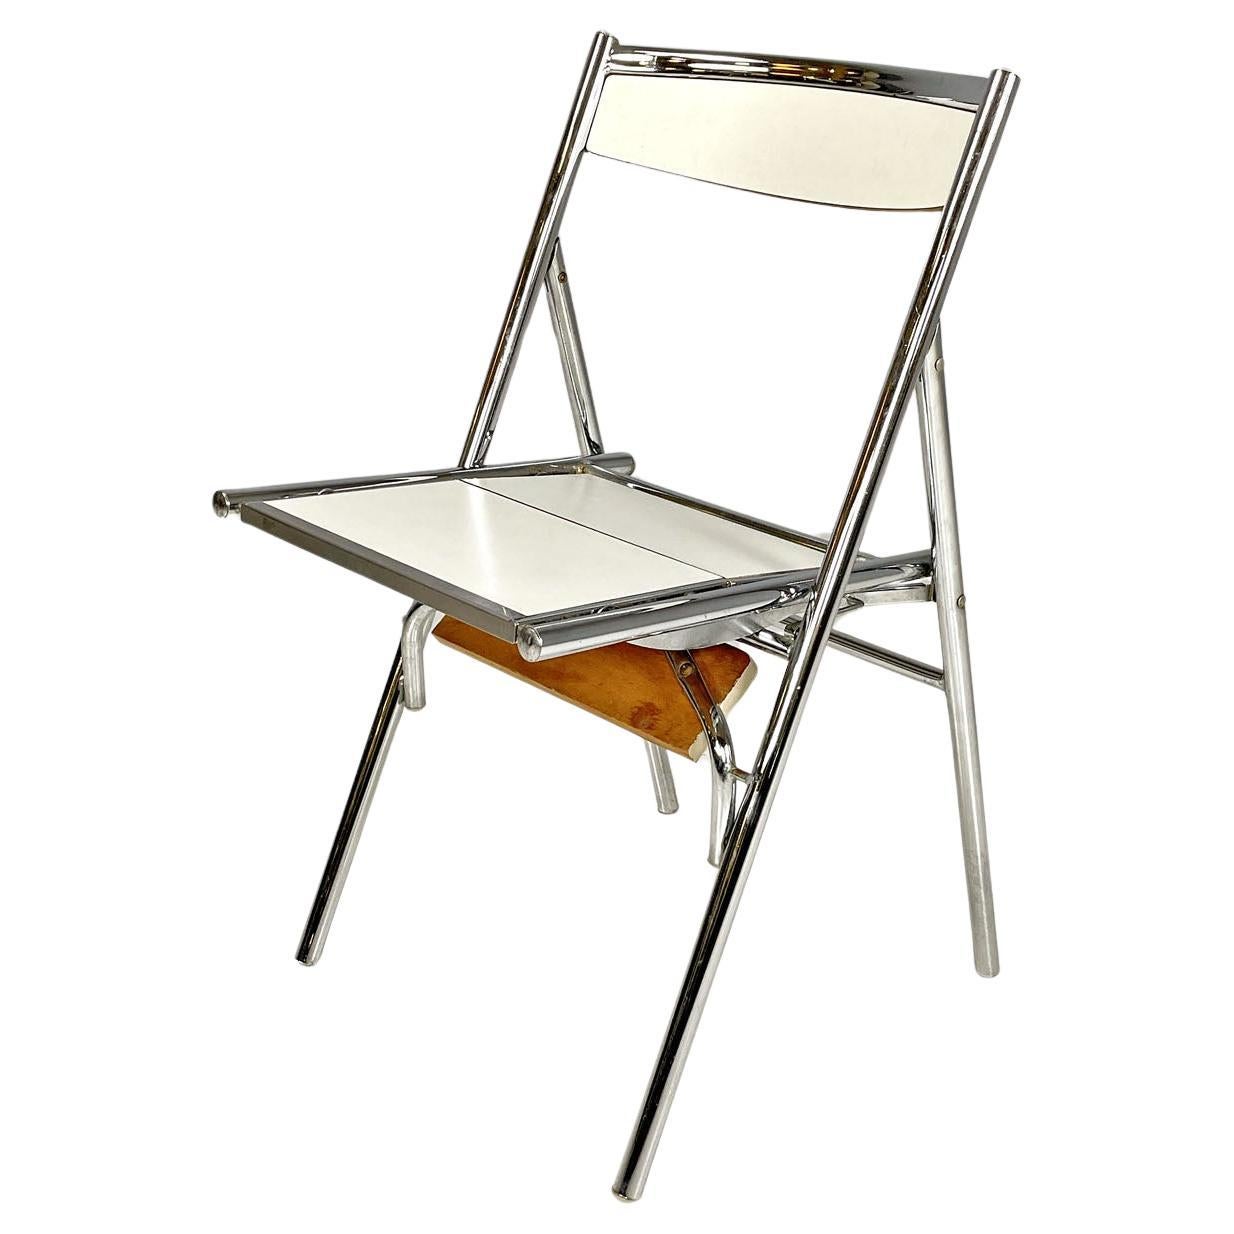 Italian modern steel and white laminate chair convertible into a ladder, 1970s